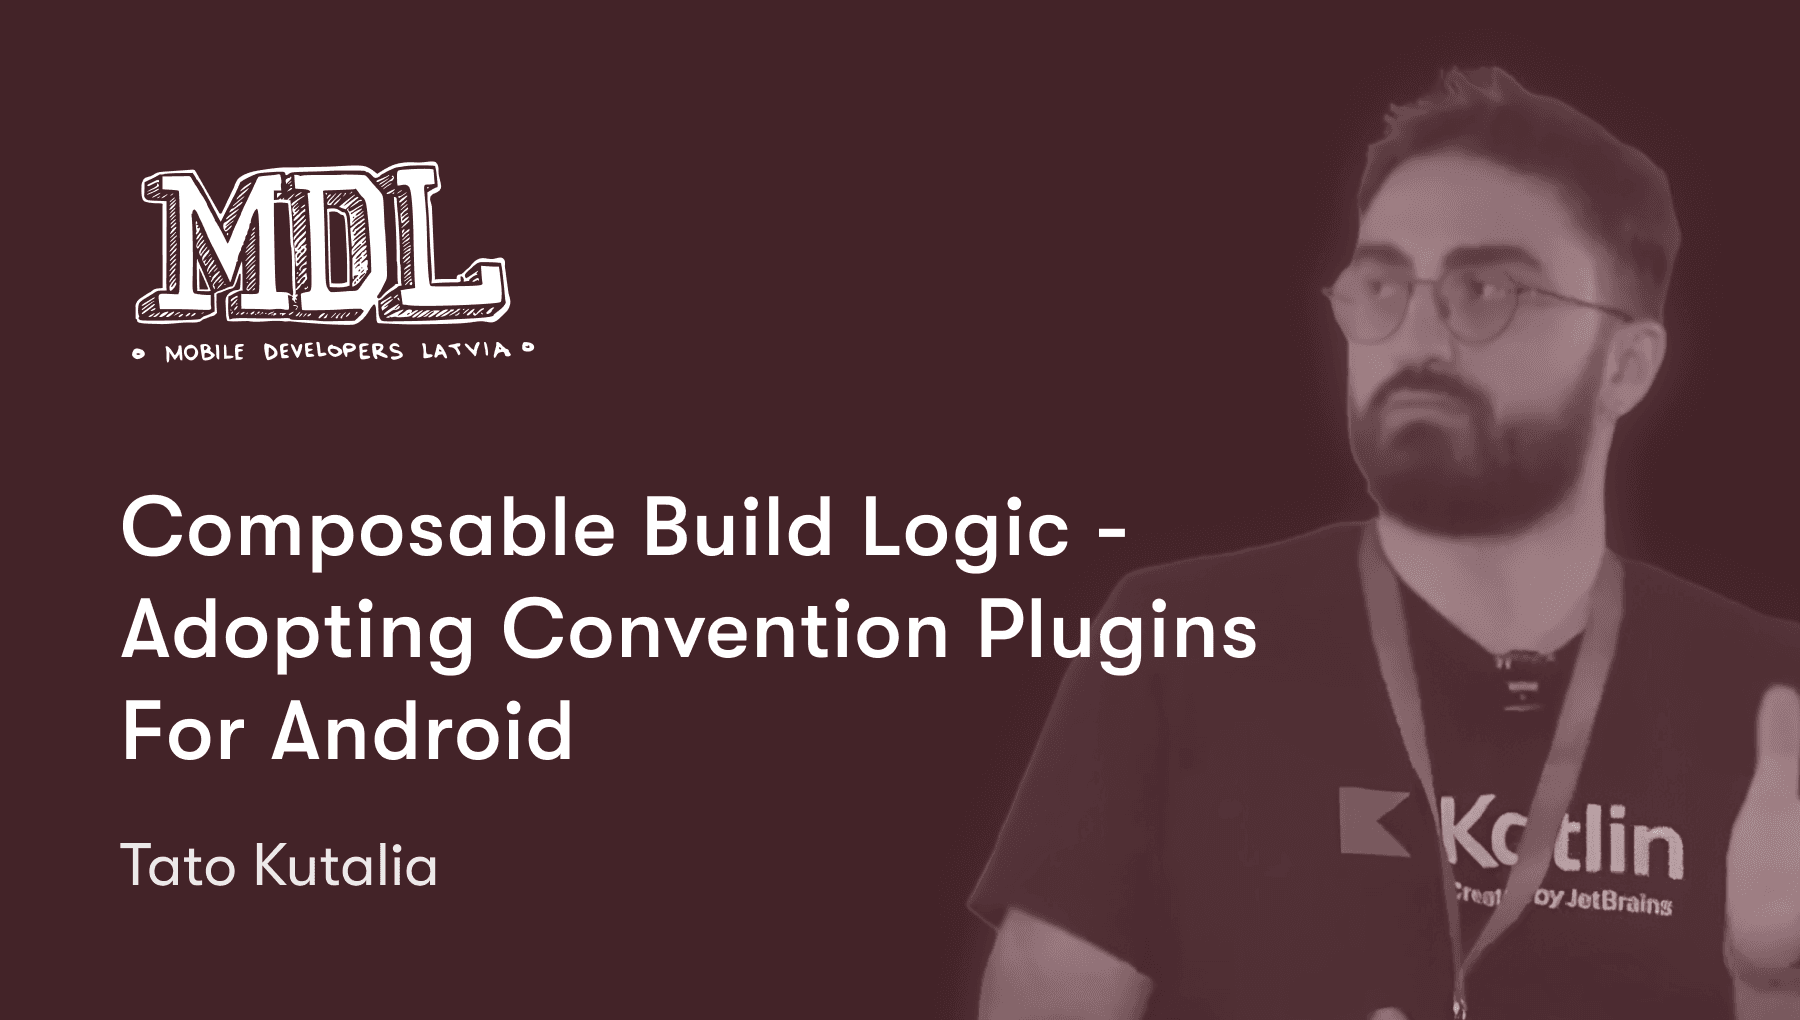 Composable Build Logic - Adopting Convention Plugins For Android | Tato Kutalia | MDL Meetup #18